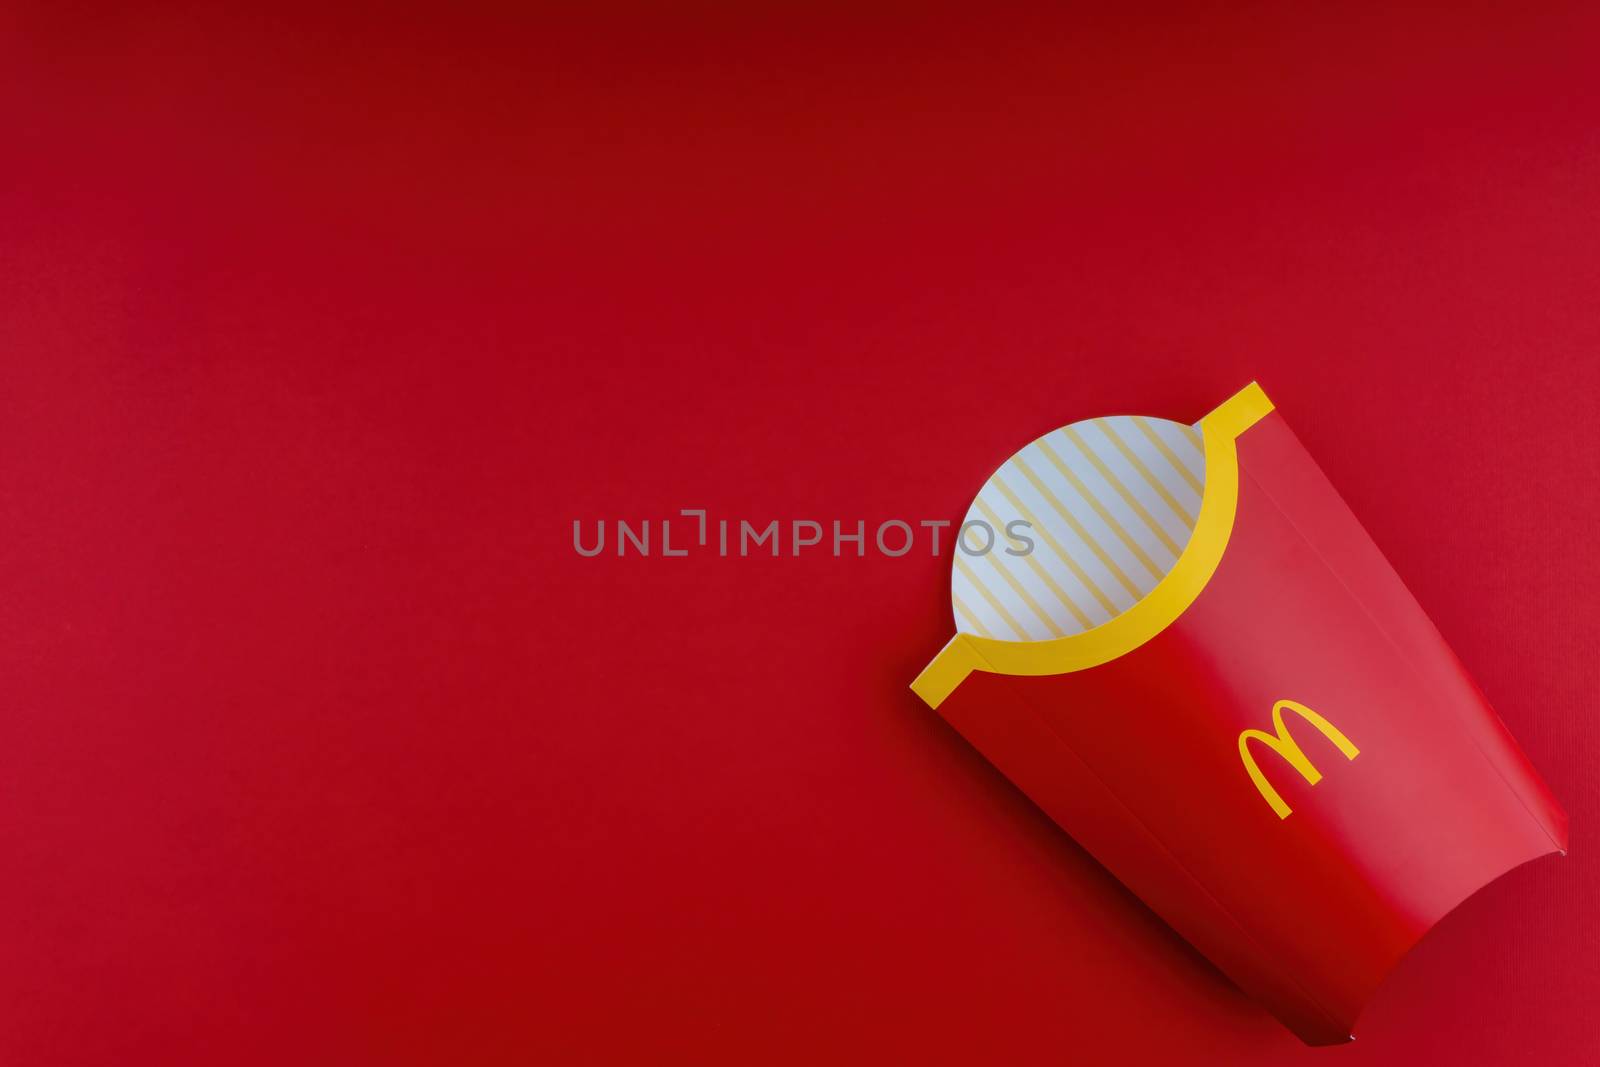 McDonalds french fries box on red background by silverwings